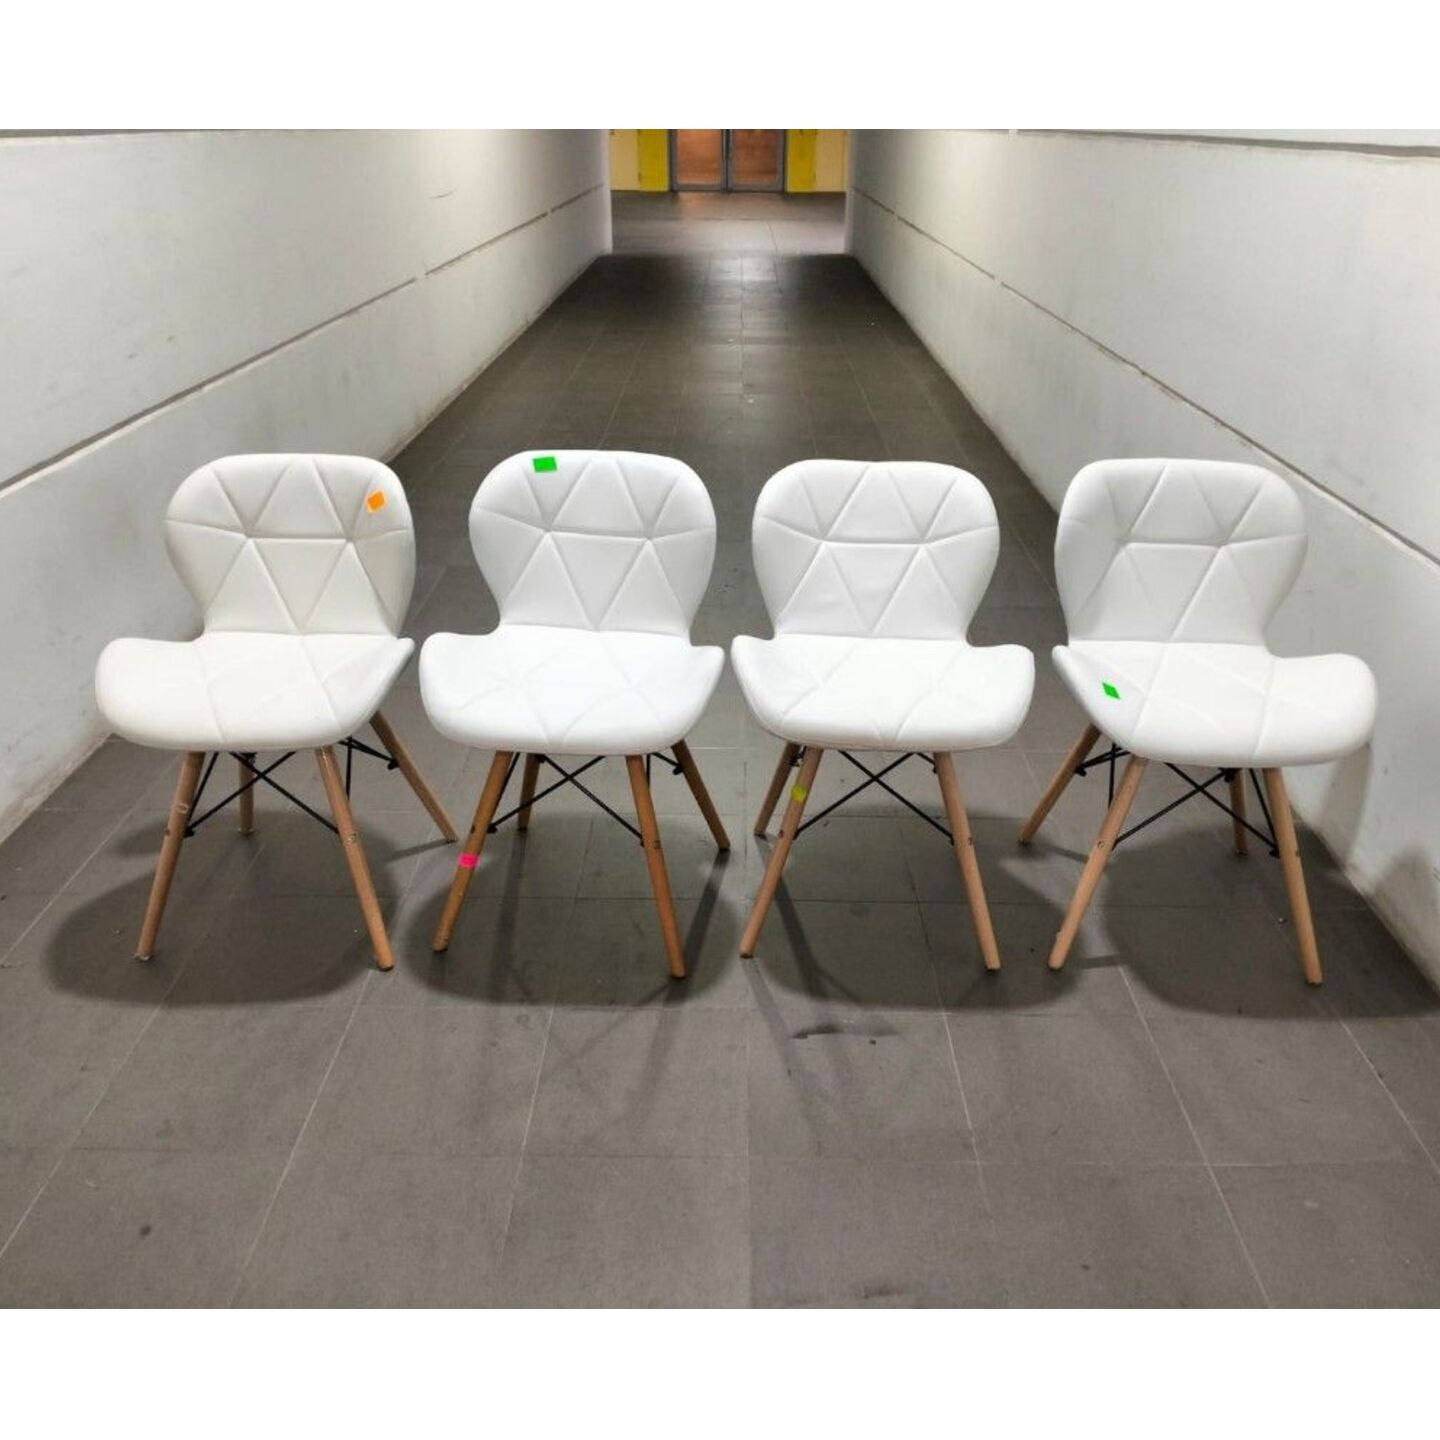 KYOCHI Dininig Chairs in WHITE - SET OF 4